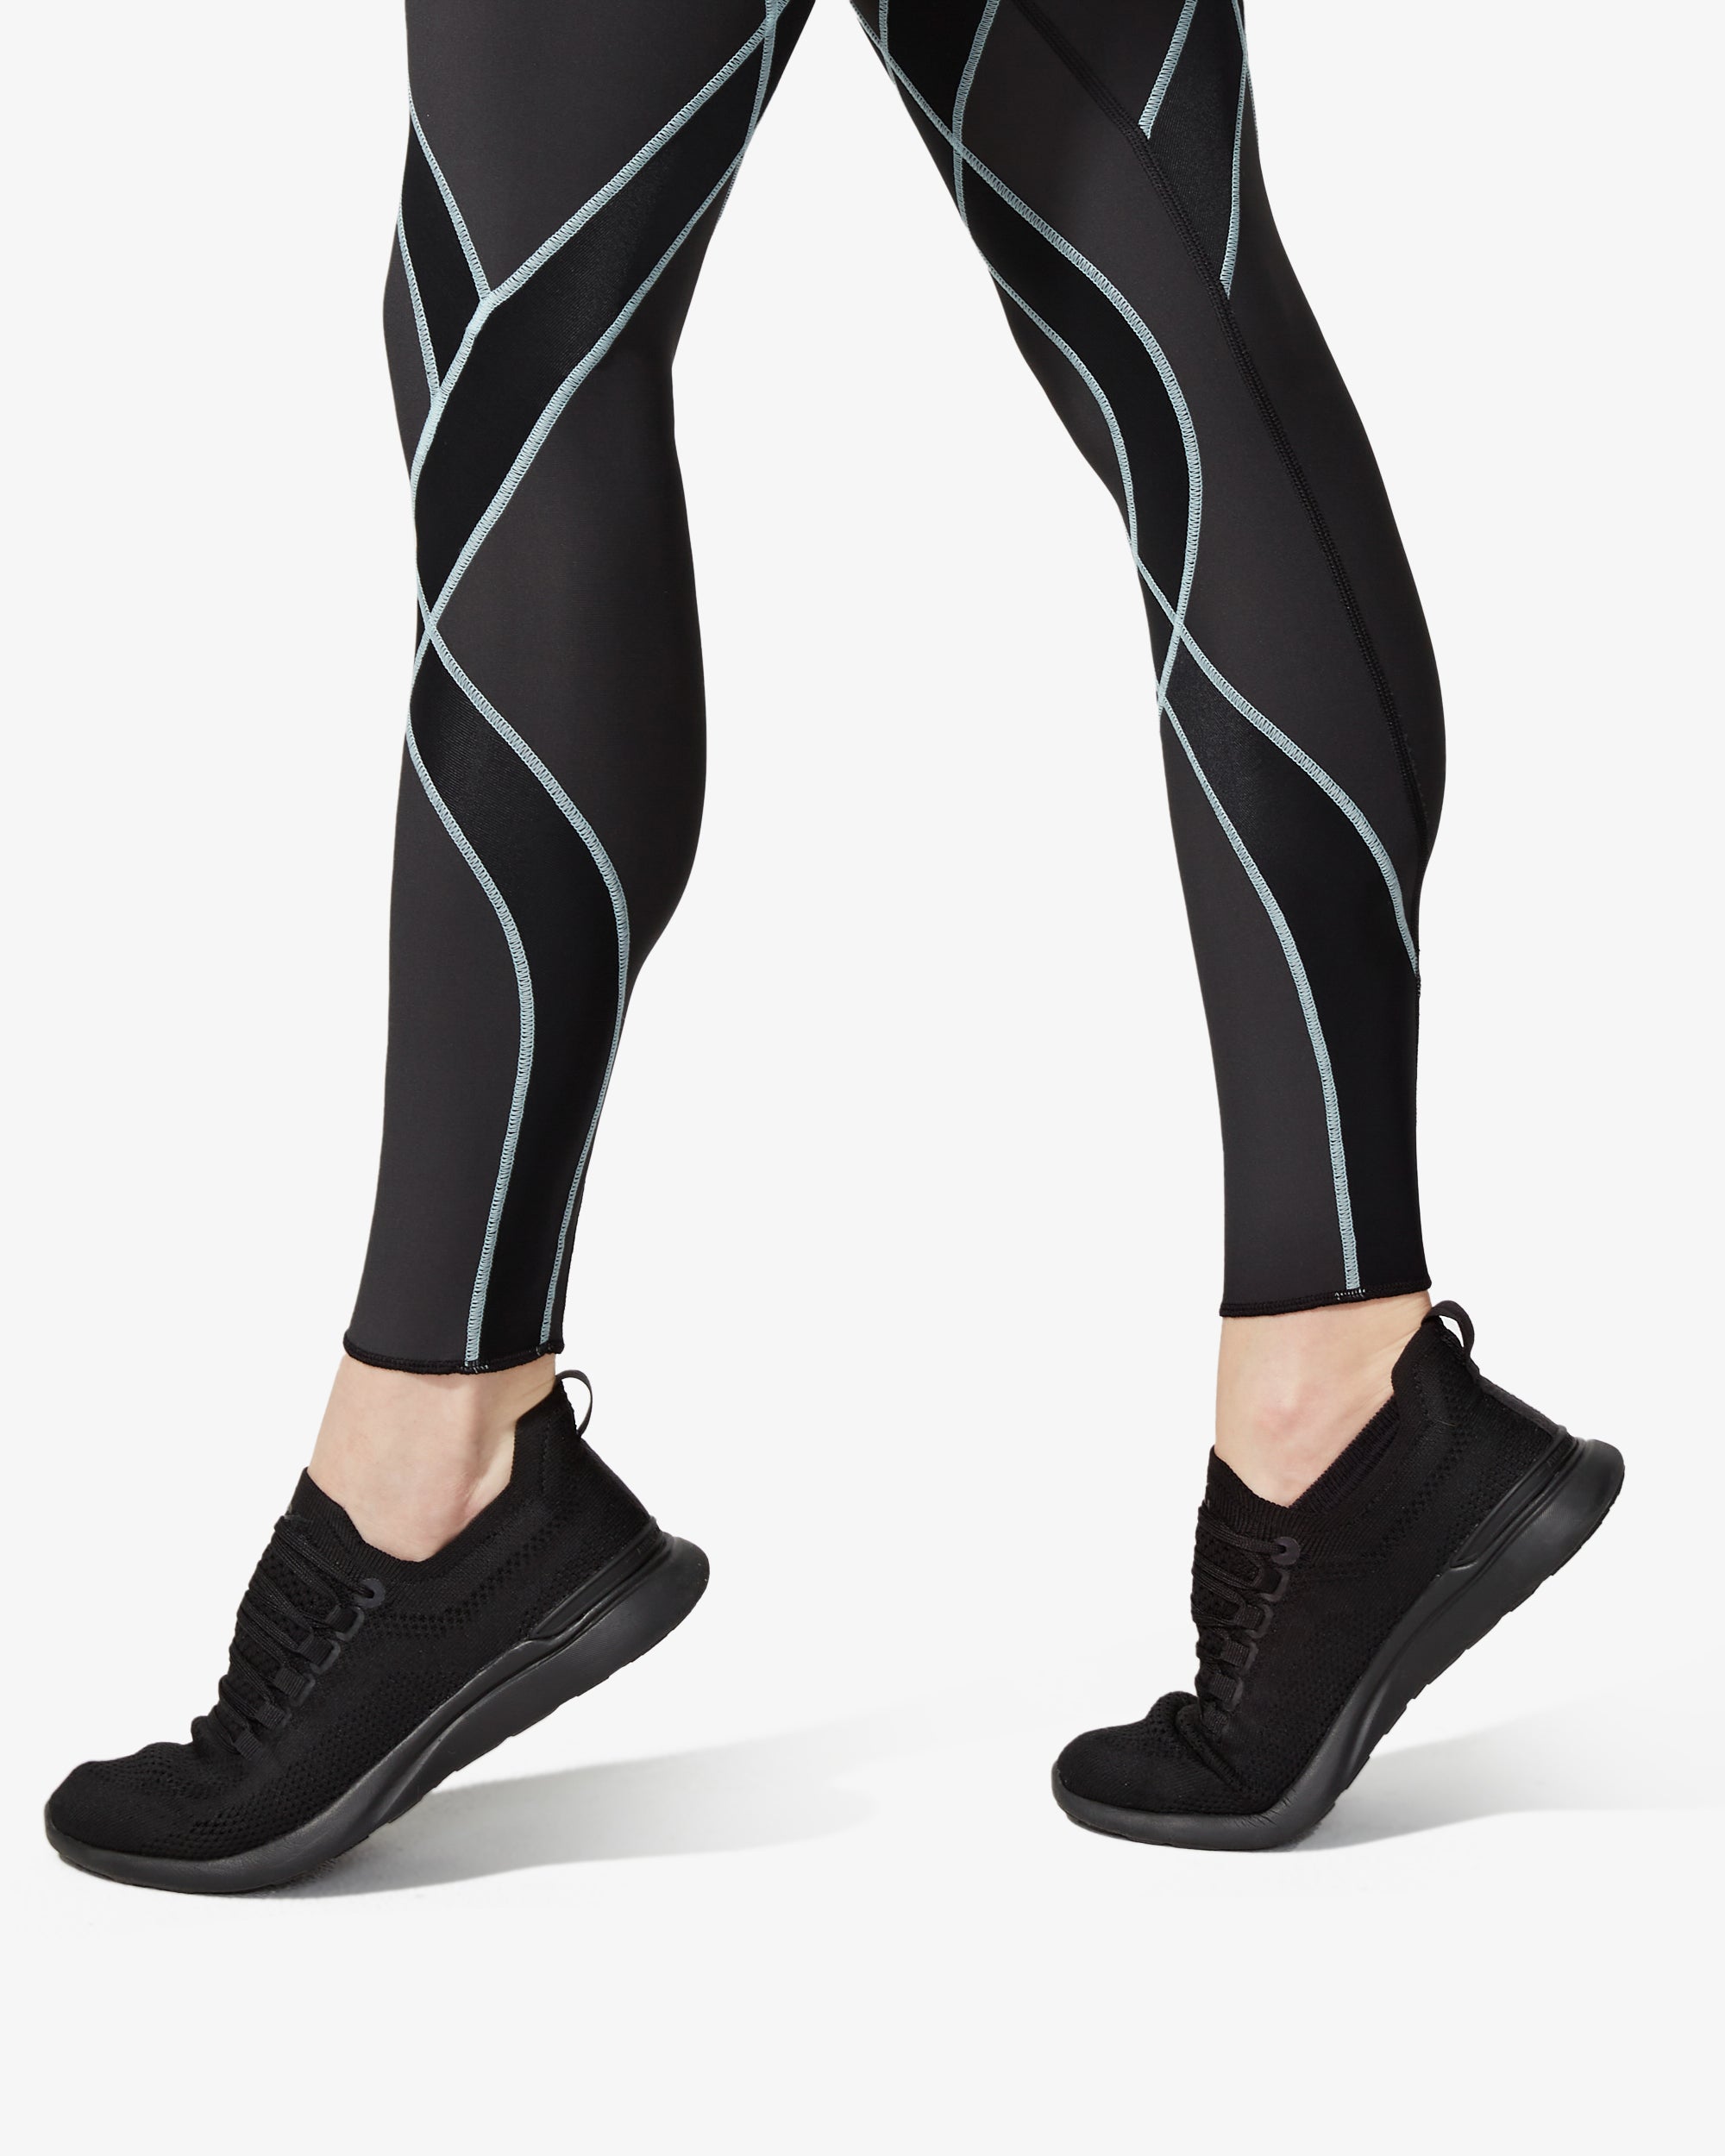  CW-X Stabilyx 2.0 Joint Support Compression Tight, Grey  Stitch, Large : Clothing, Shoes & Jewelry